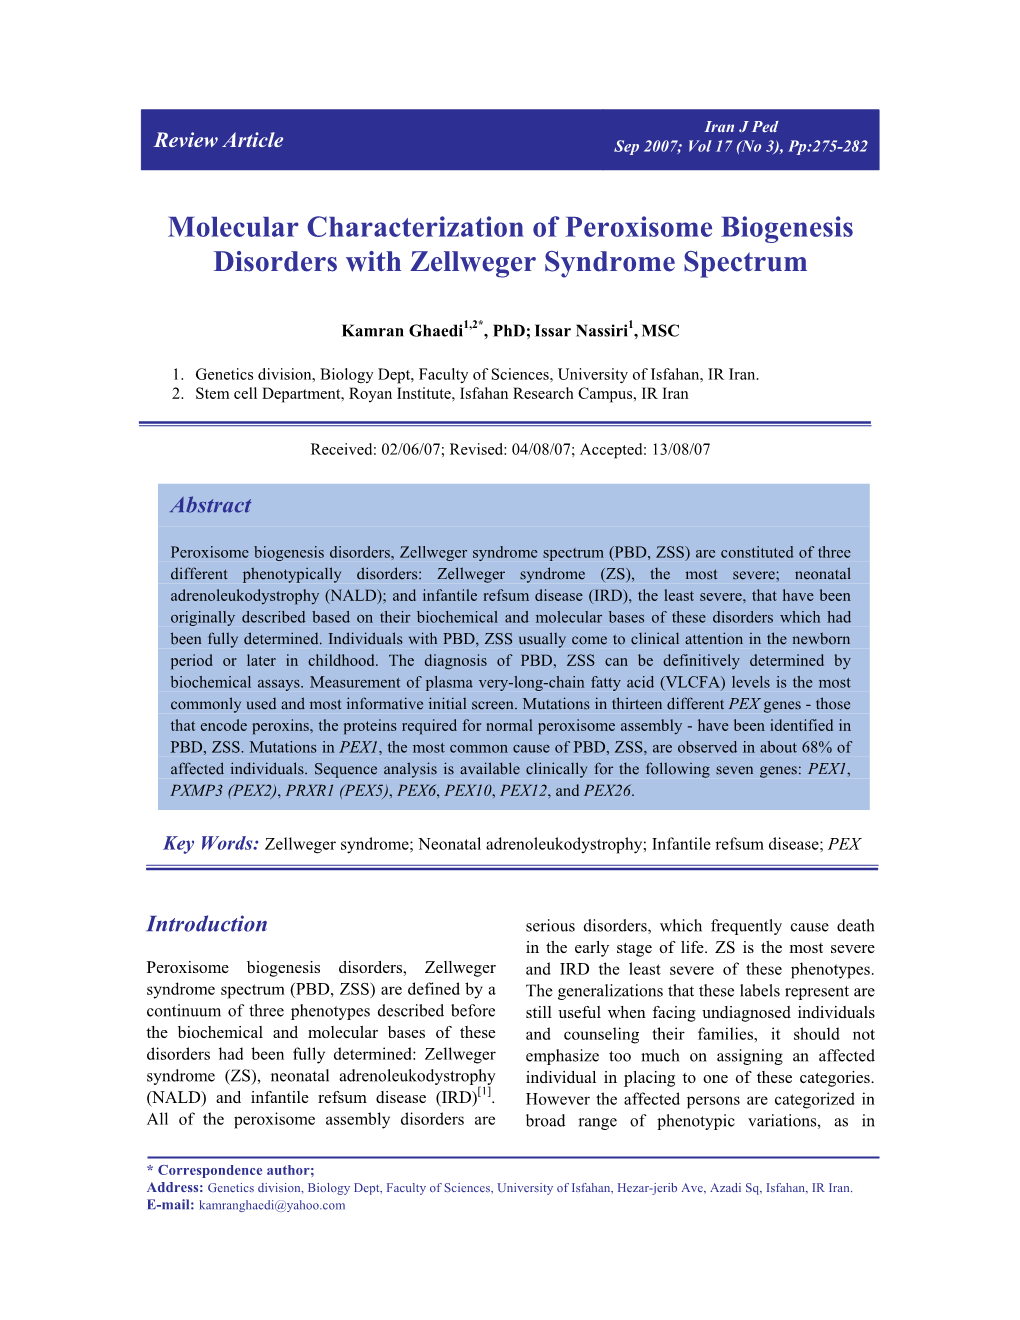 Molecular Characterization of Peroxisome Biogenesis Disorders with Zellweger Syndrome Spectrum